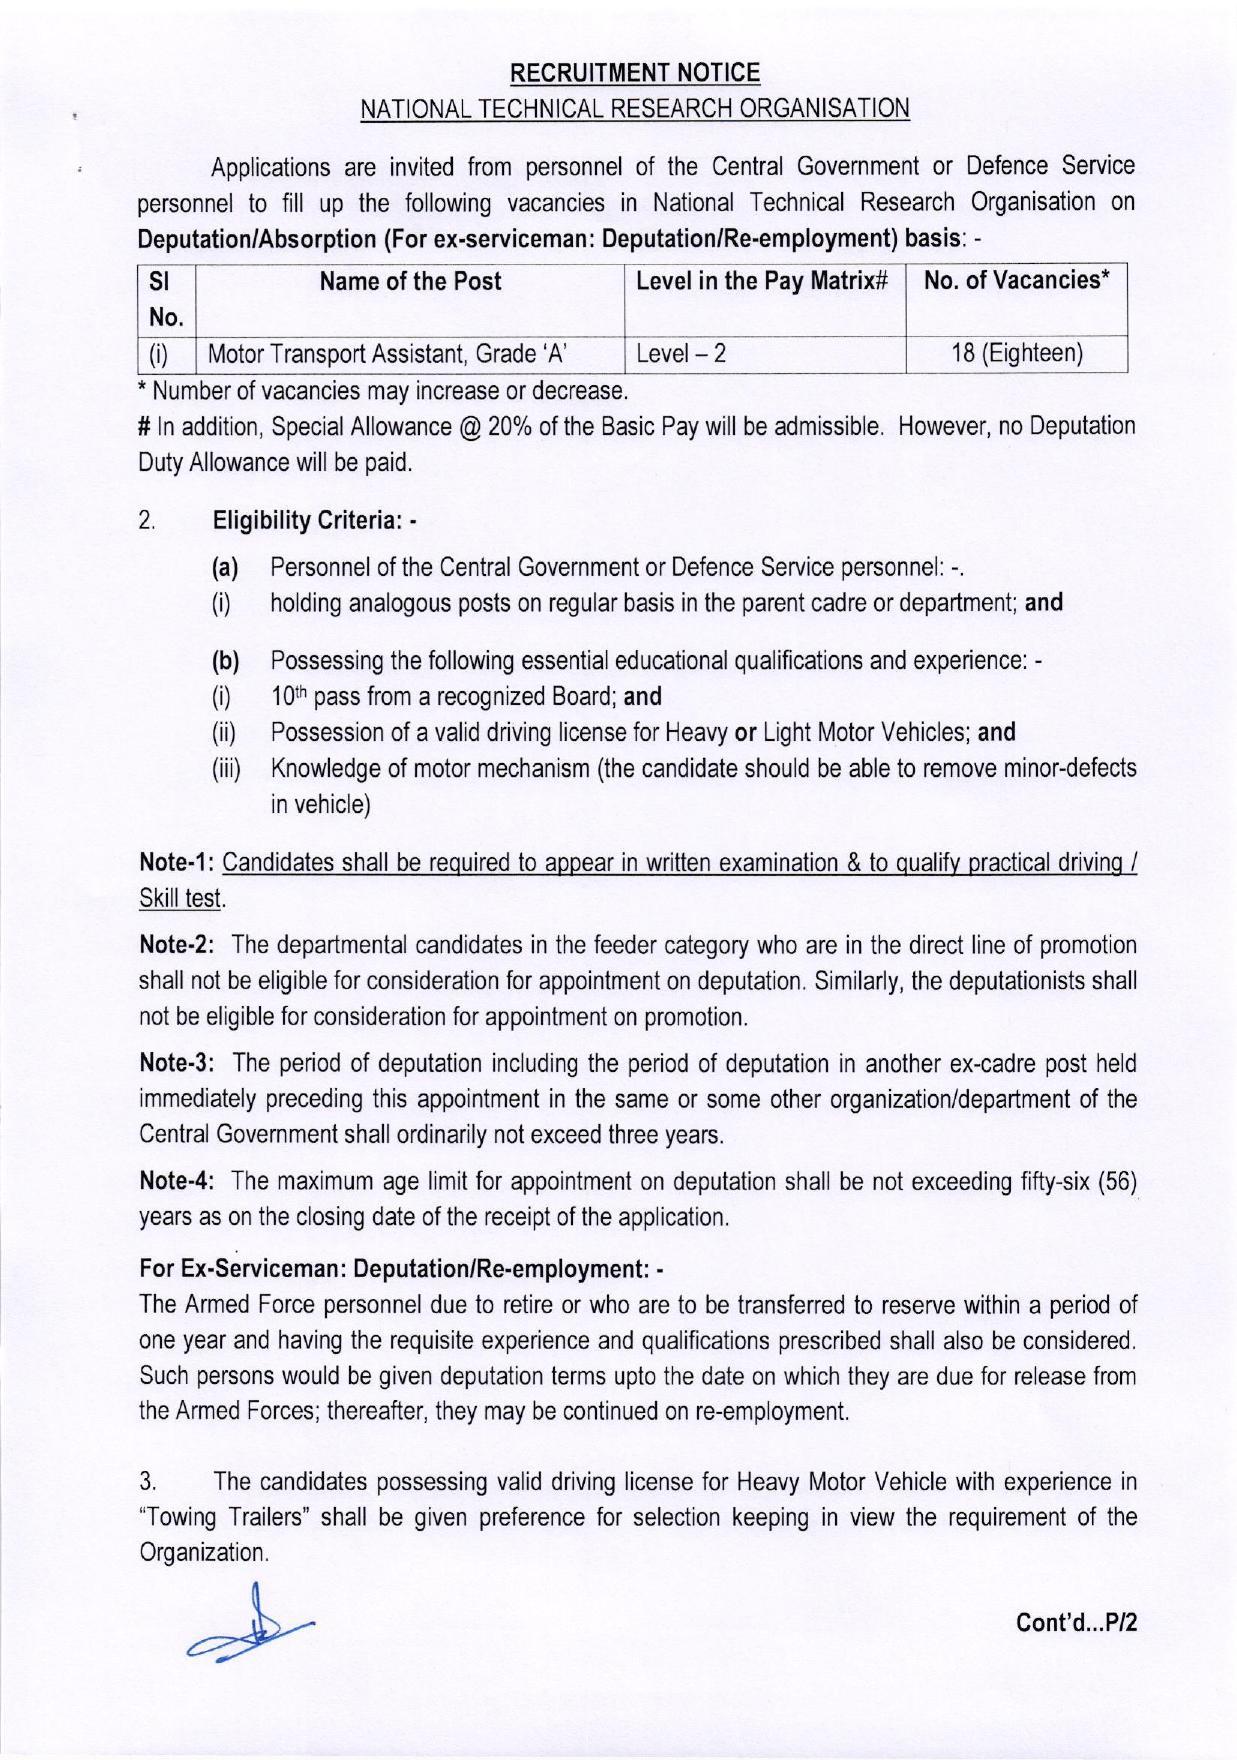 NTRO Invites Application for 18 Motor Transport Assistant Recruitment 2022 - Page 2